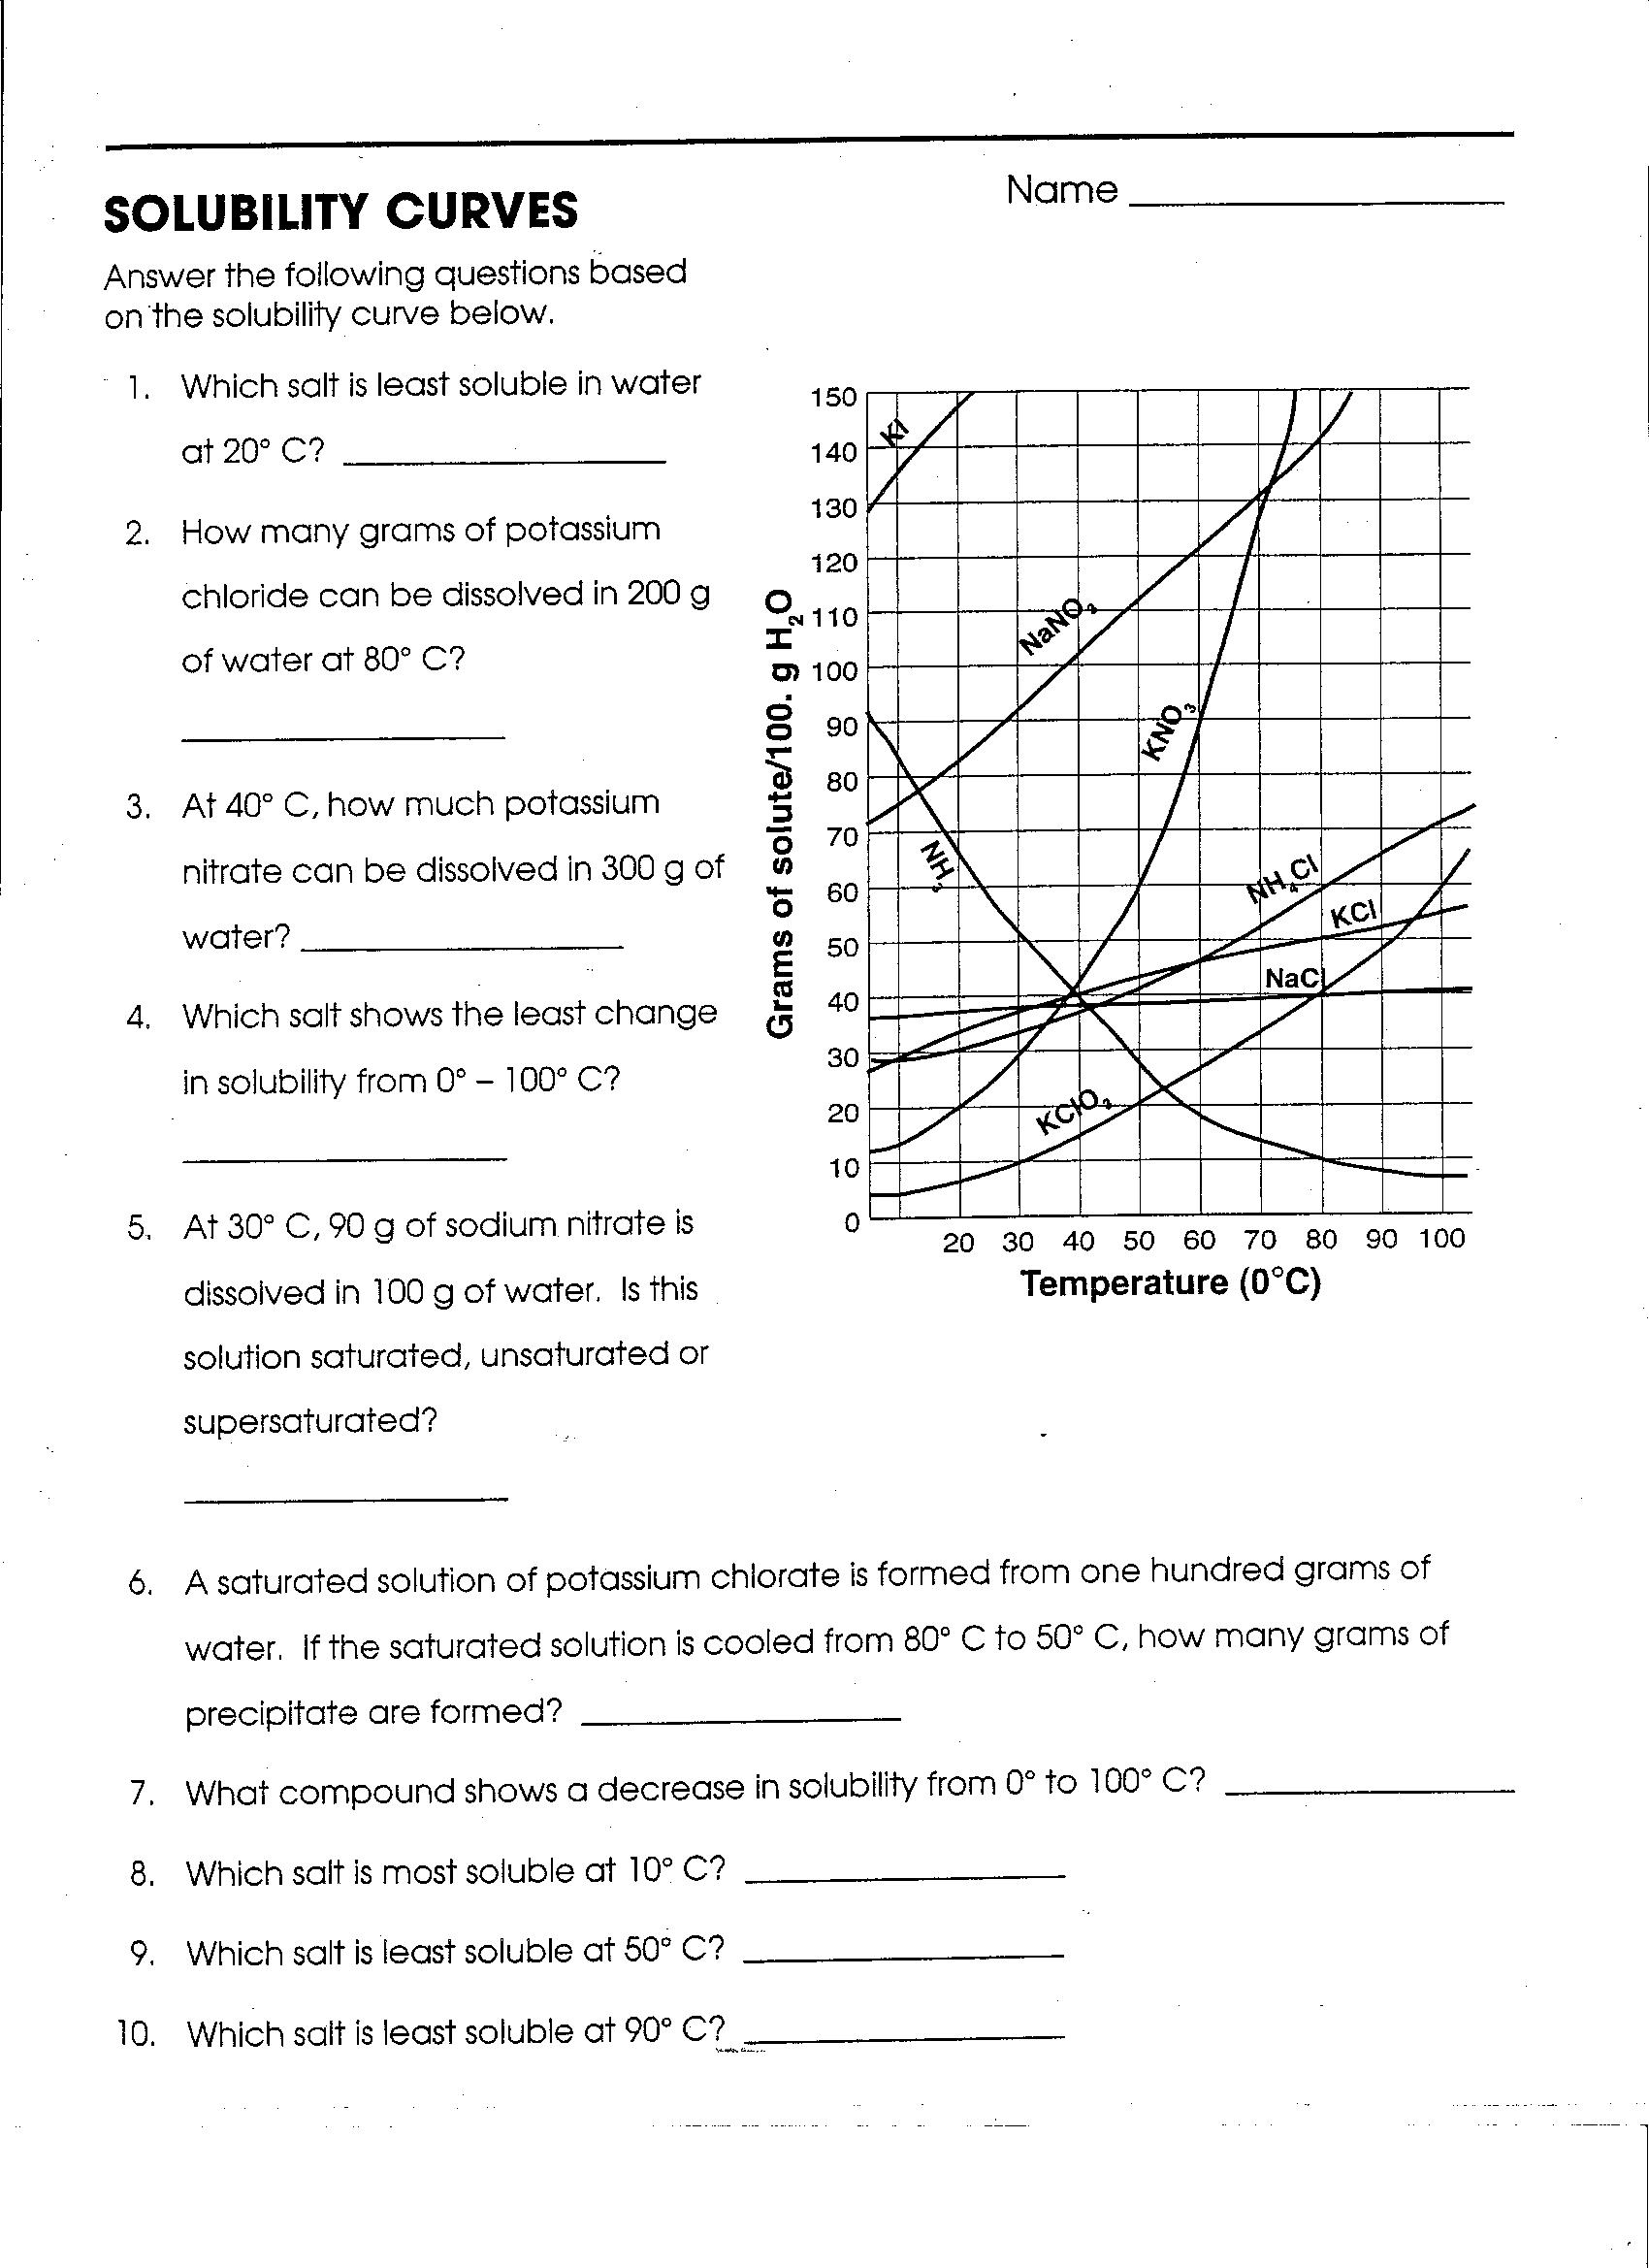 Solubility Curves Worksheet Answers